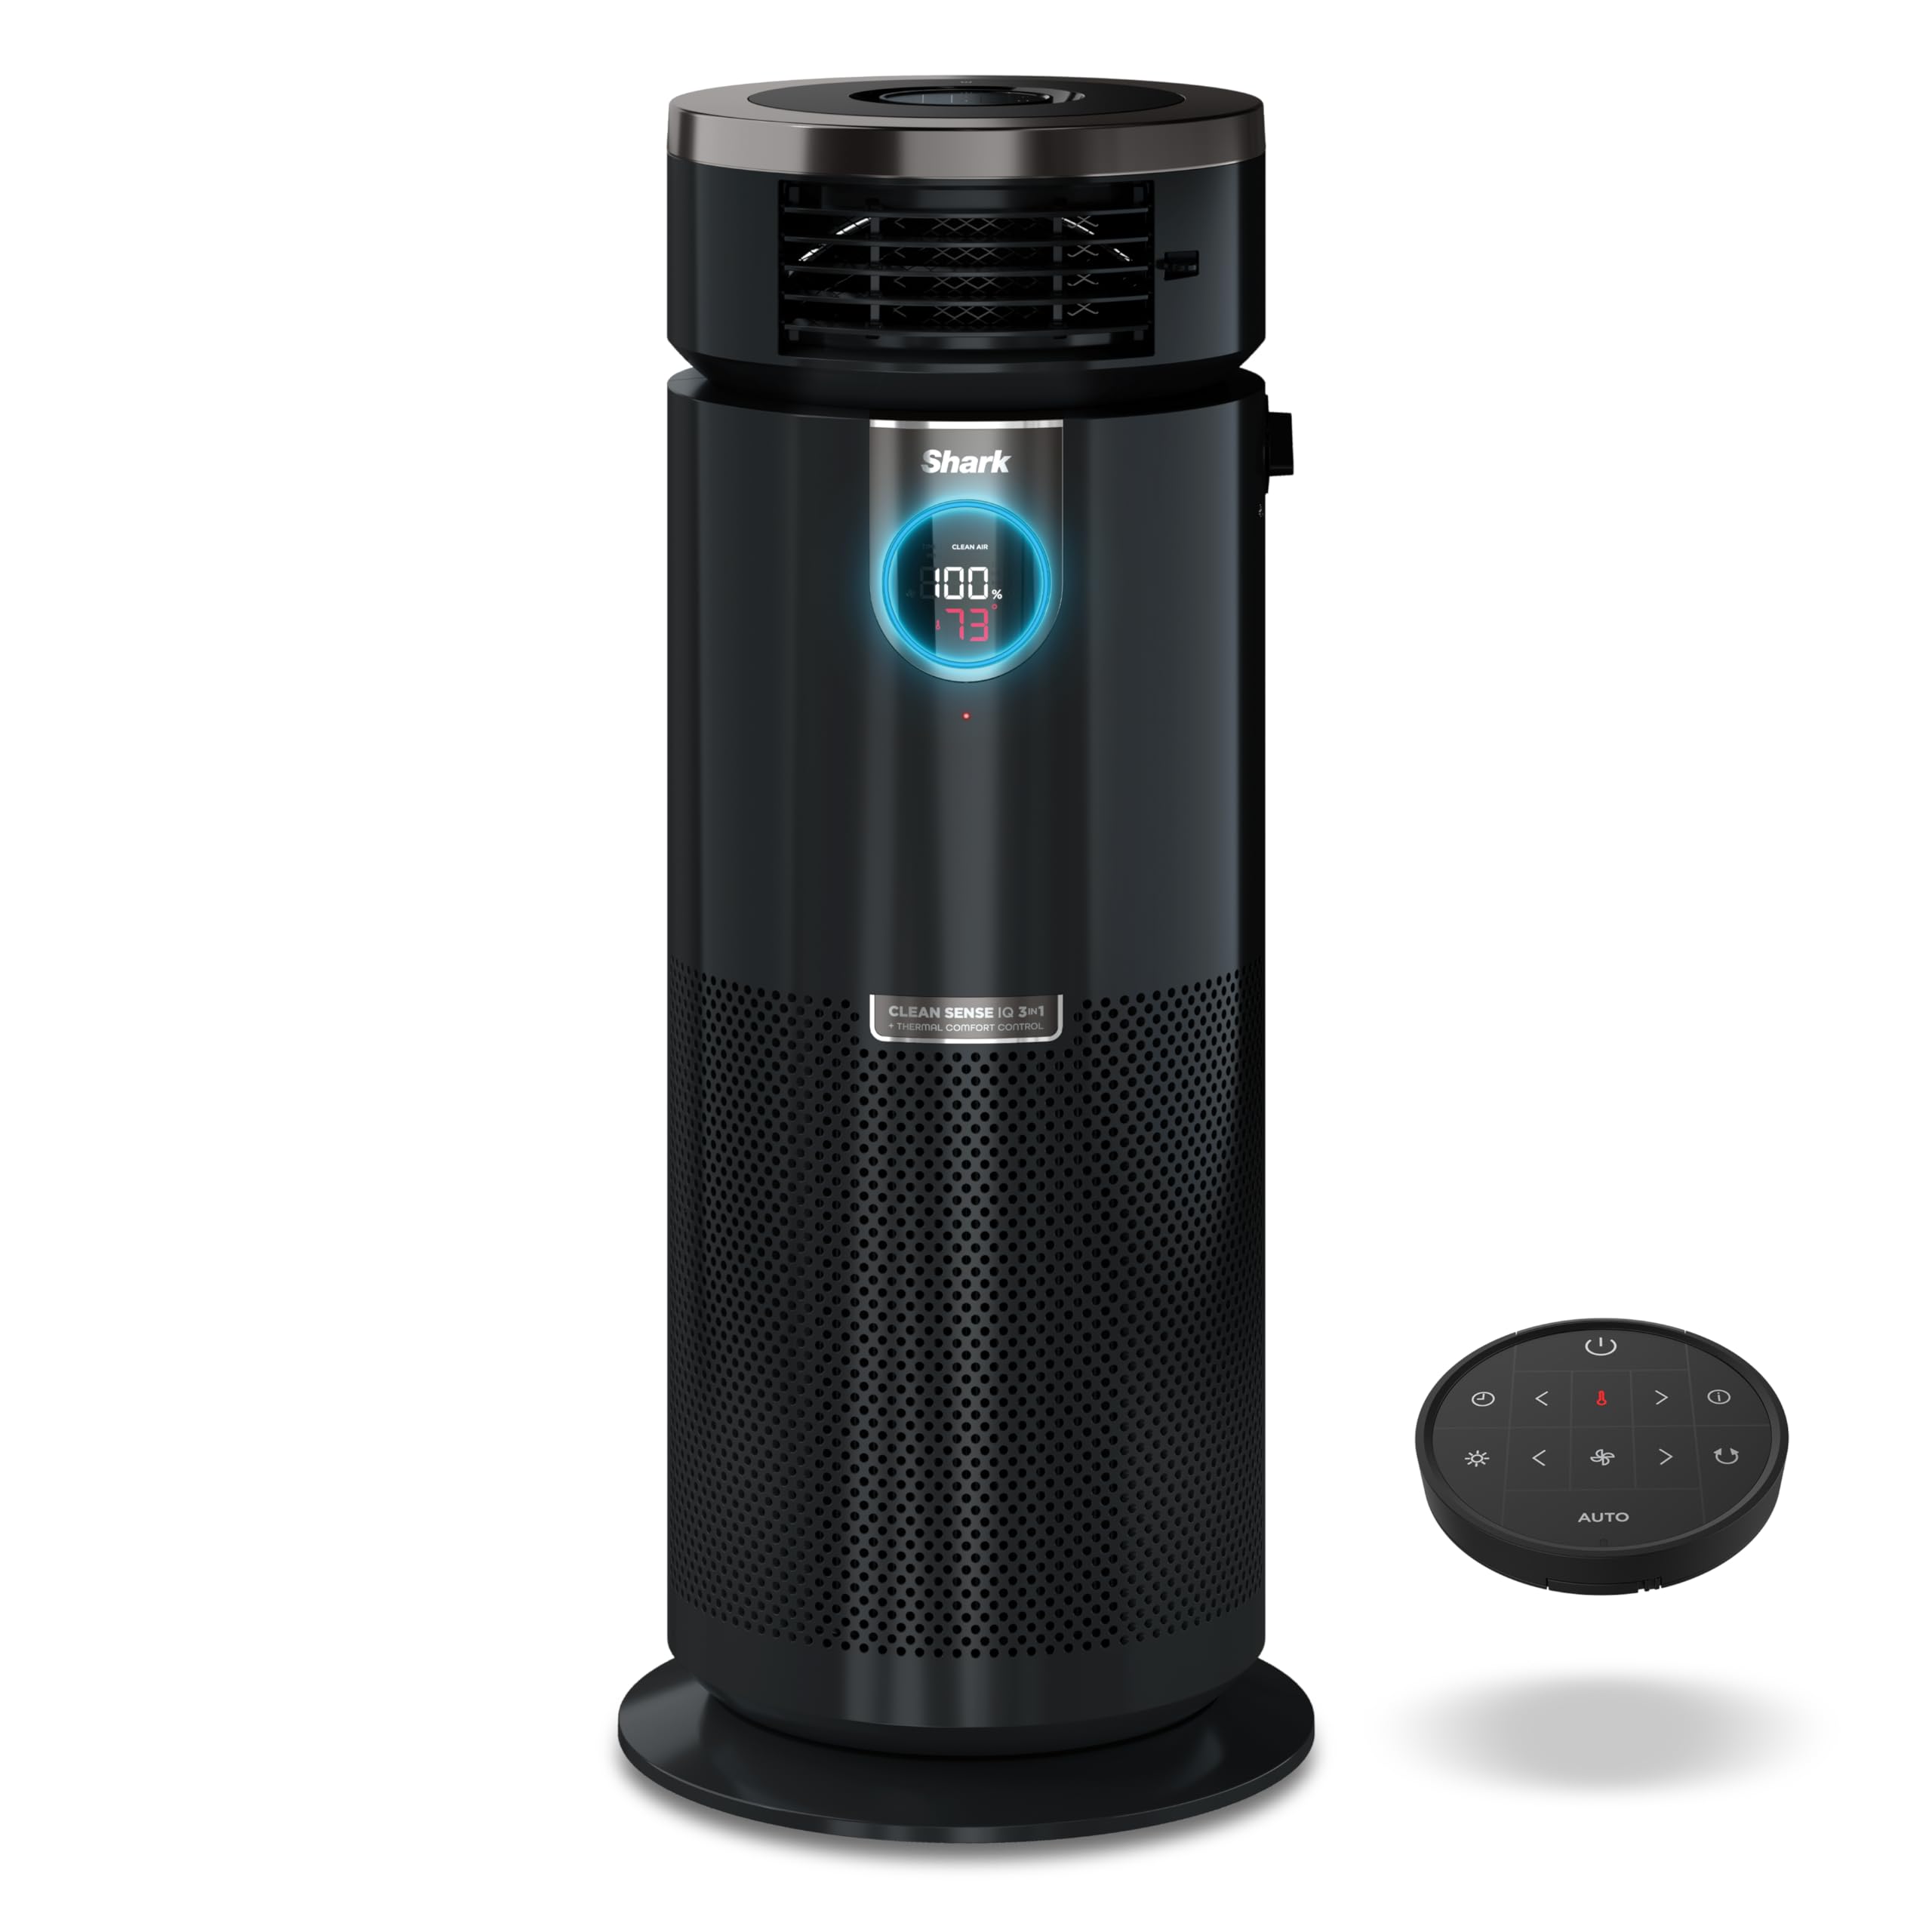 Shark 3-in-1 Max Air Purifier, Heater & Fan with NanoSeal HEPA, Cleansense IQ, Odor Lock, for 1000 Sq. Ft, Charcoal Grey $199.99